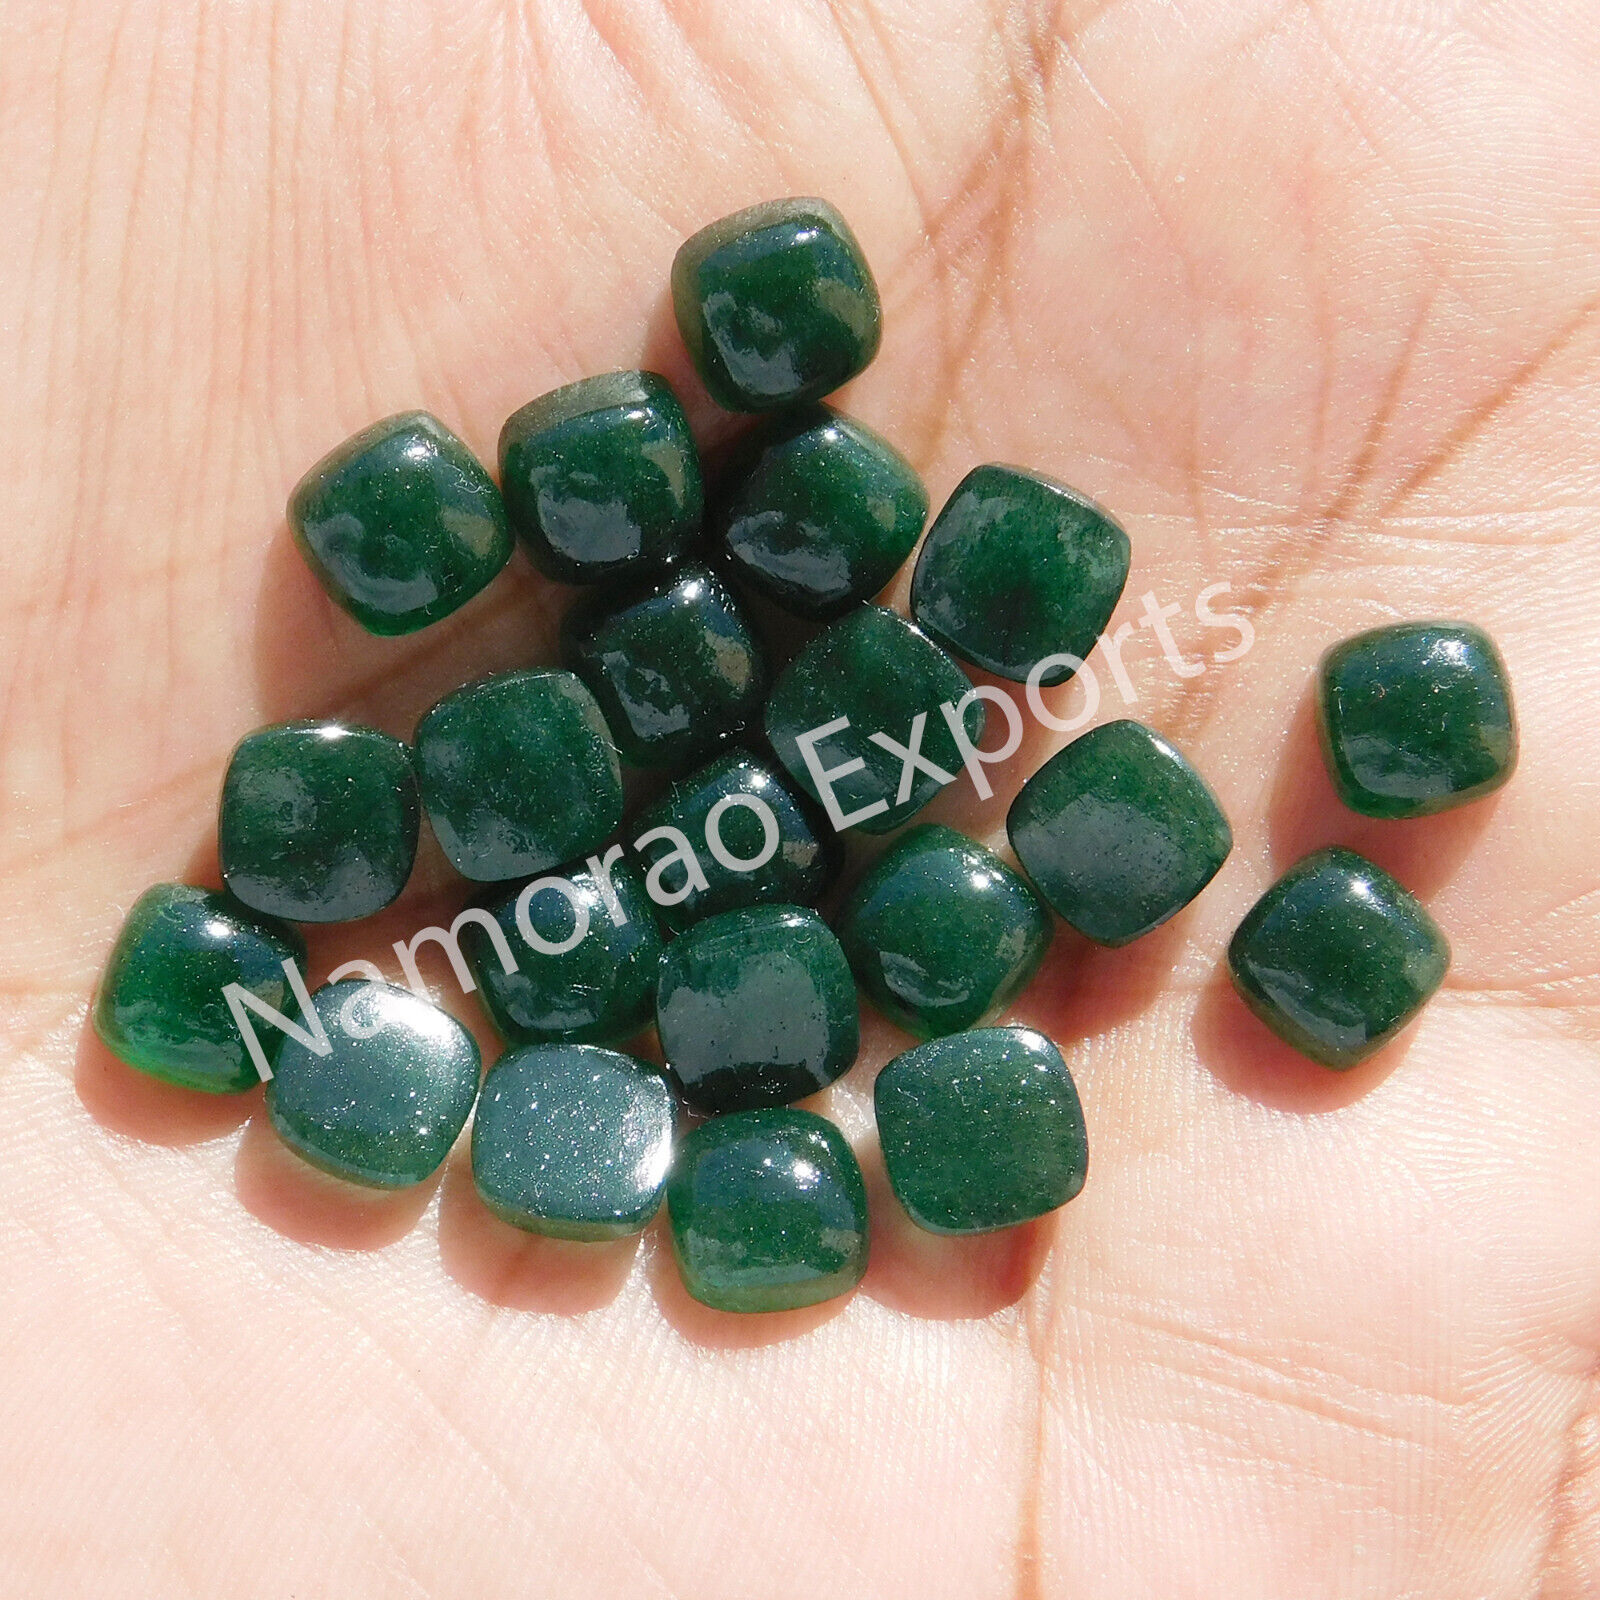 Primary image for 4x4 mm Cushion Natural Green Aventurine Cabochon Loose Gemstone Lot